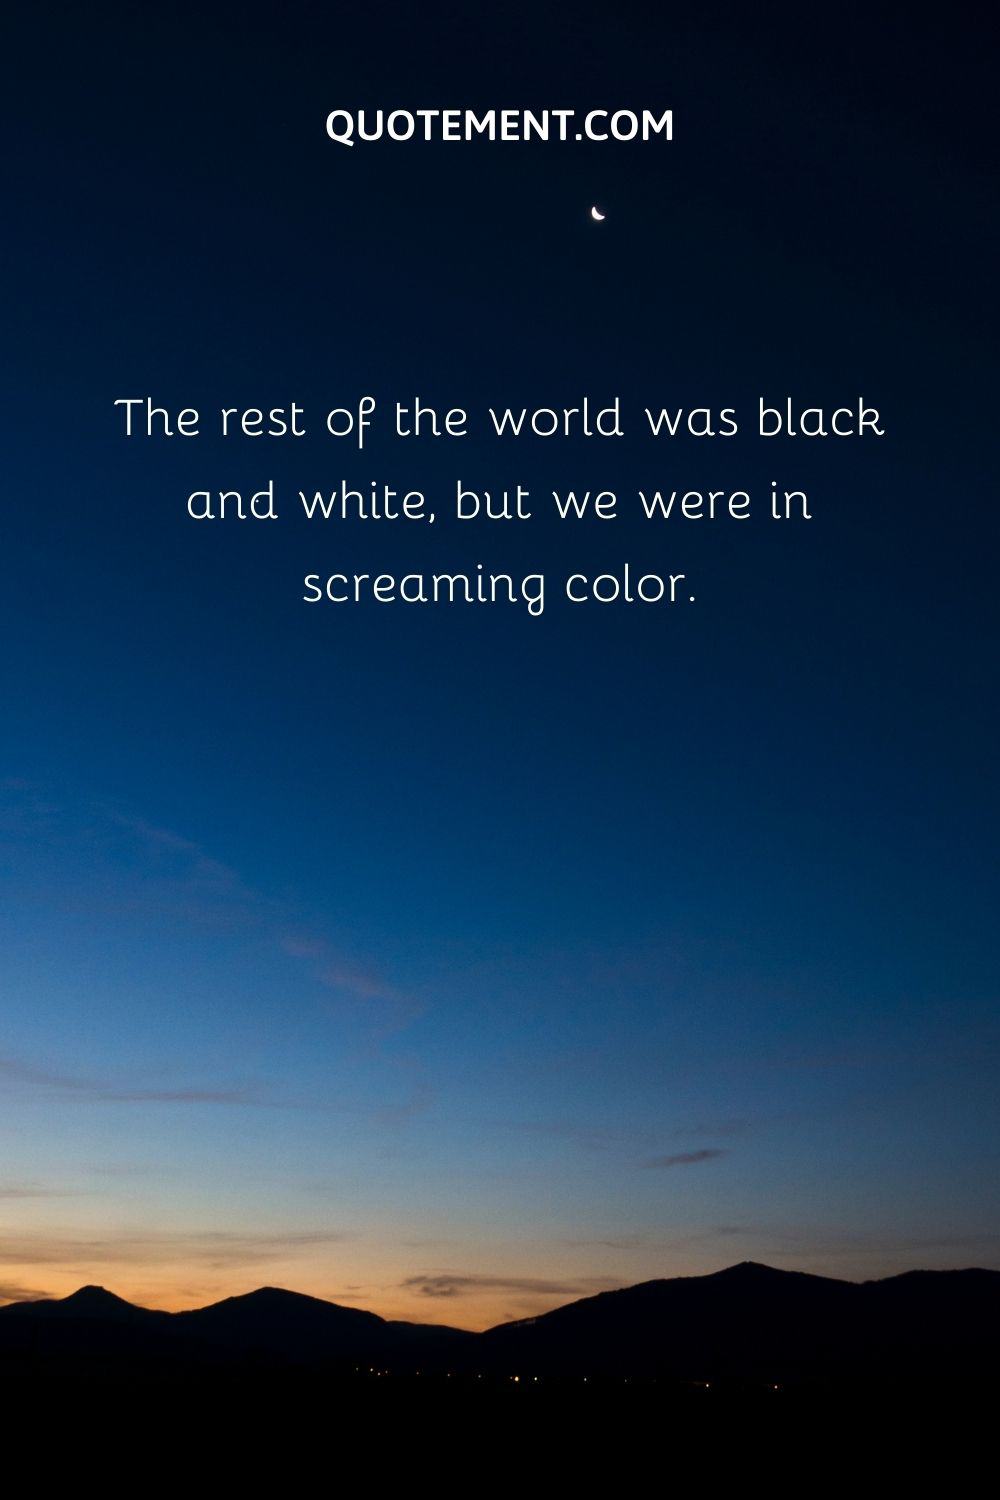 The rest of the world was black and white, but we were in screaming color